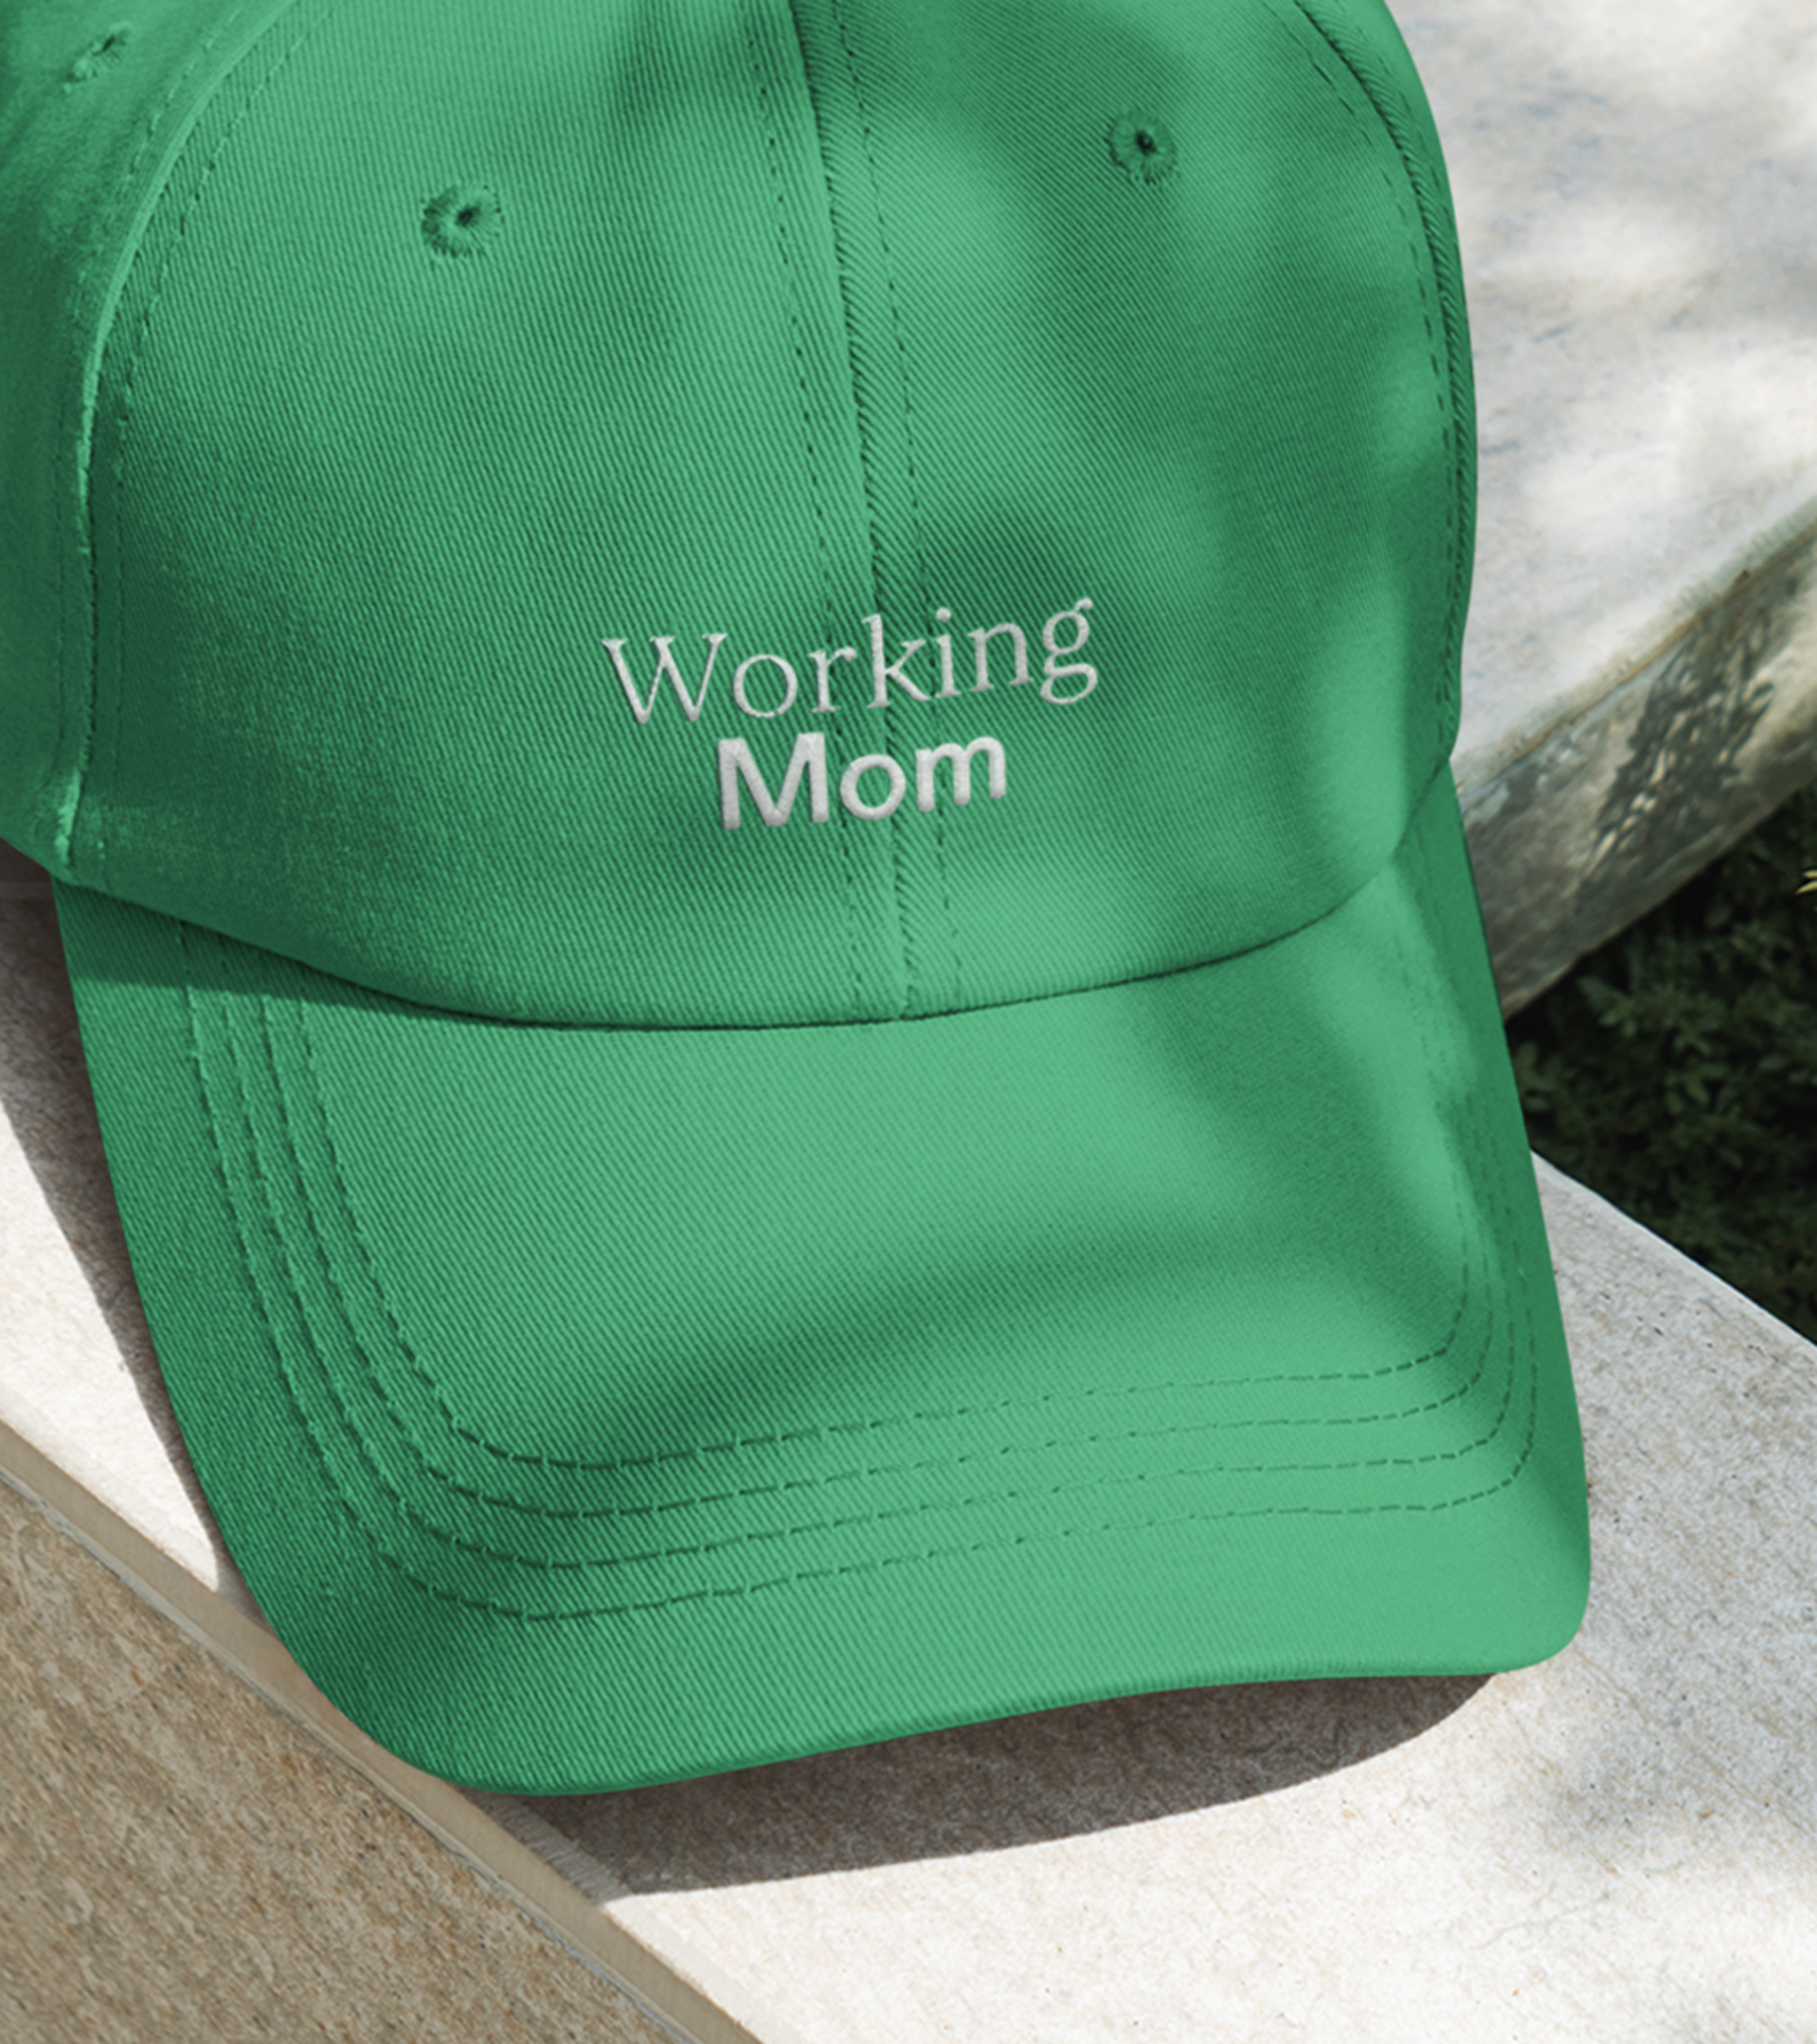 green h﻿at that says “Working Mom”